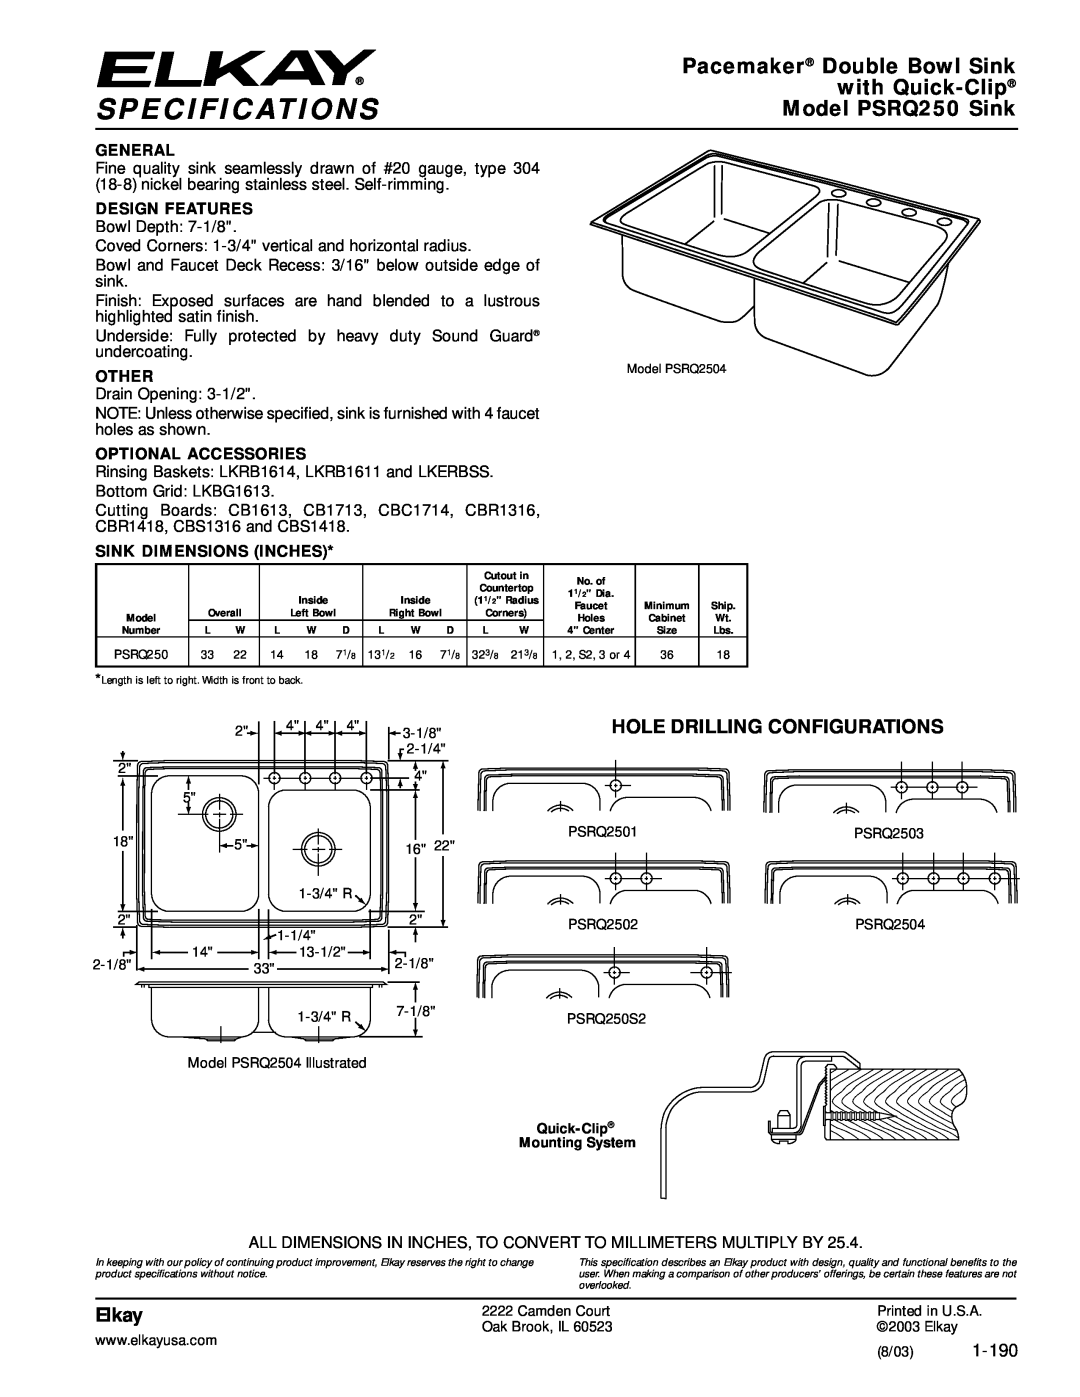 Elkay specifications Specifications, Pacemaker Double Bowl Sink, with Quick-Clip, Model PSRQ250 Sink, Elkay, 1-190 